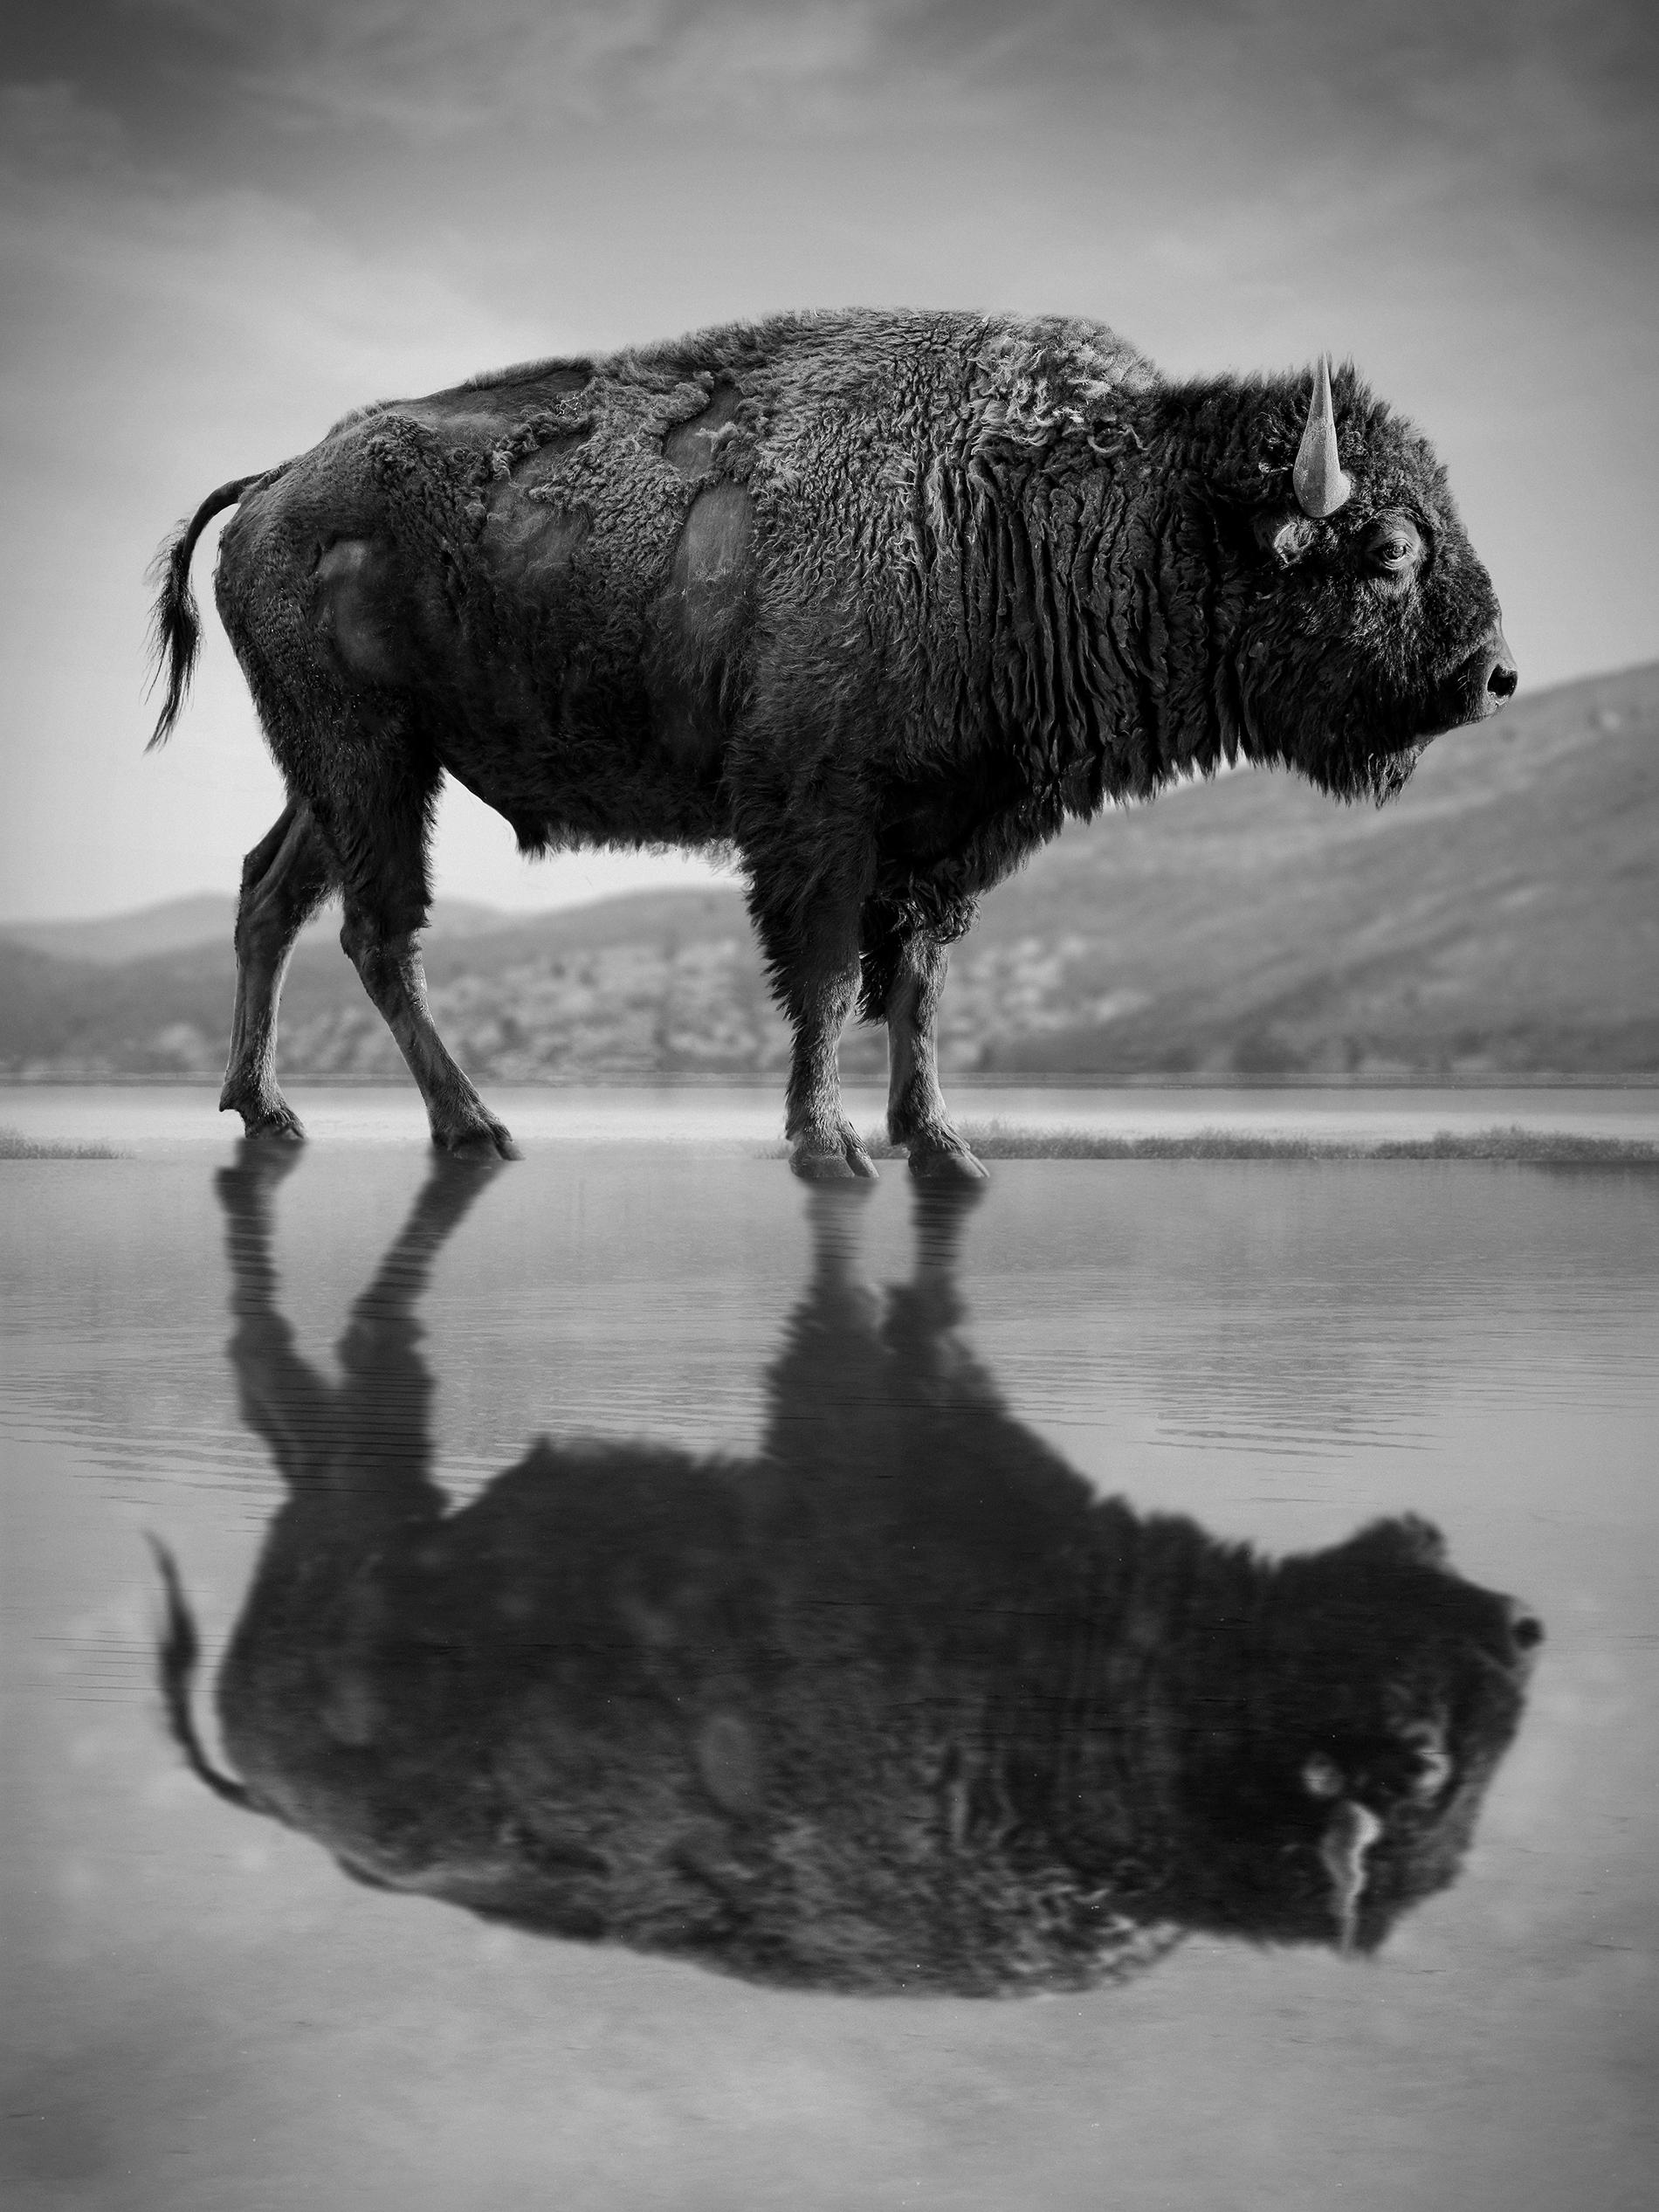 Shane Russeck Animal Print - "Old World" Black & White Bison Photography 48x36 Buffalo Signed Photograph